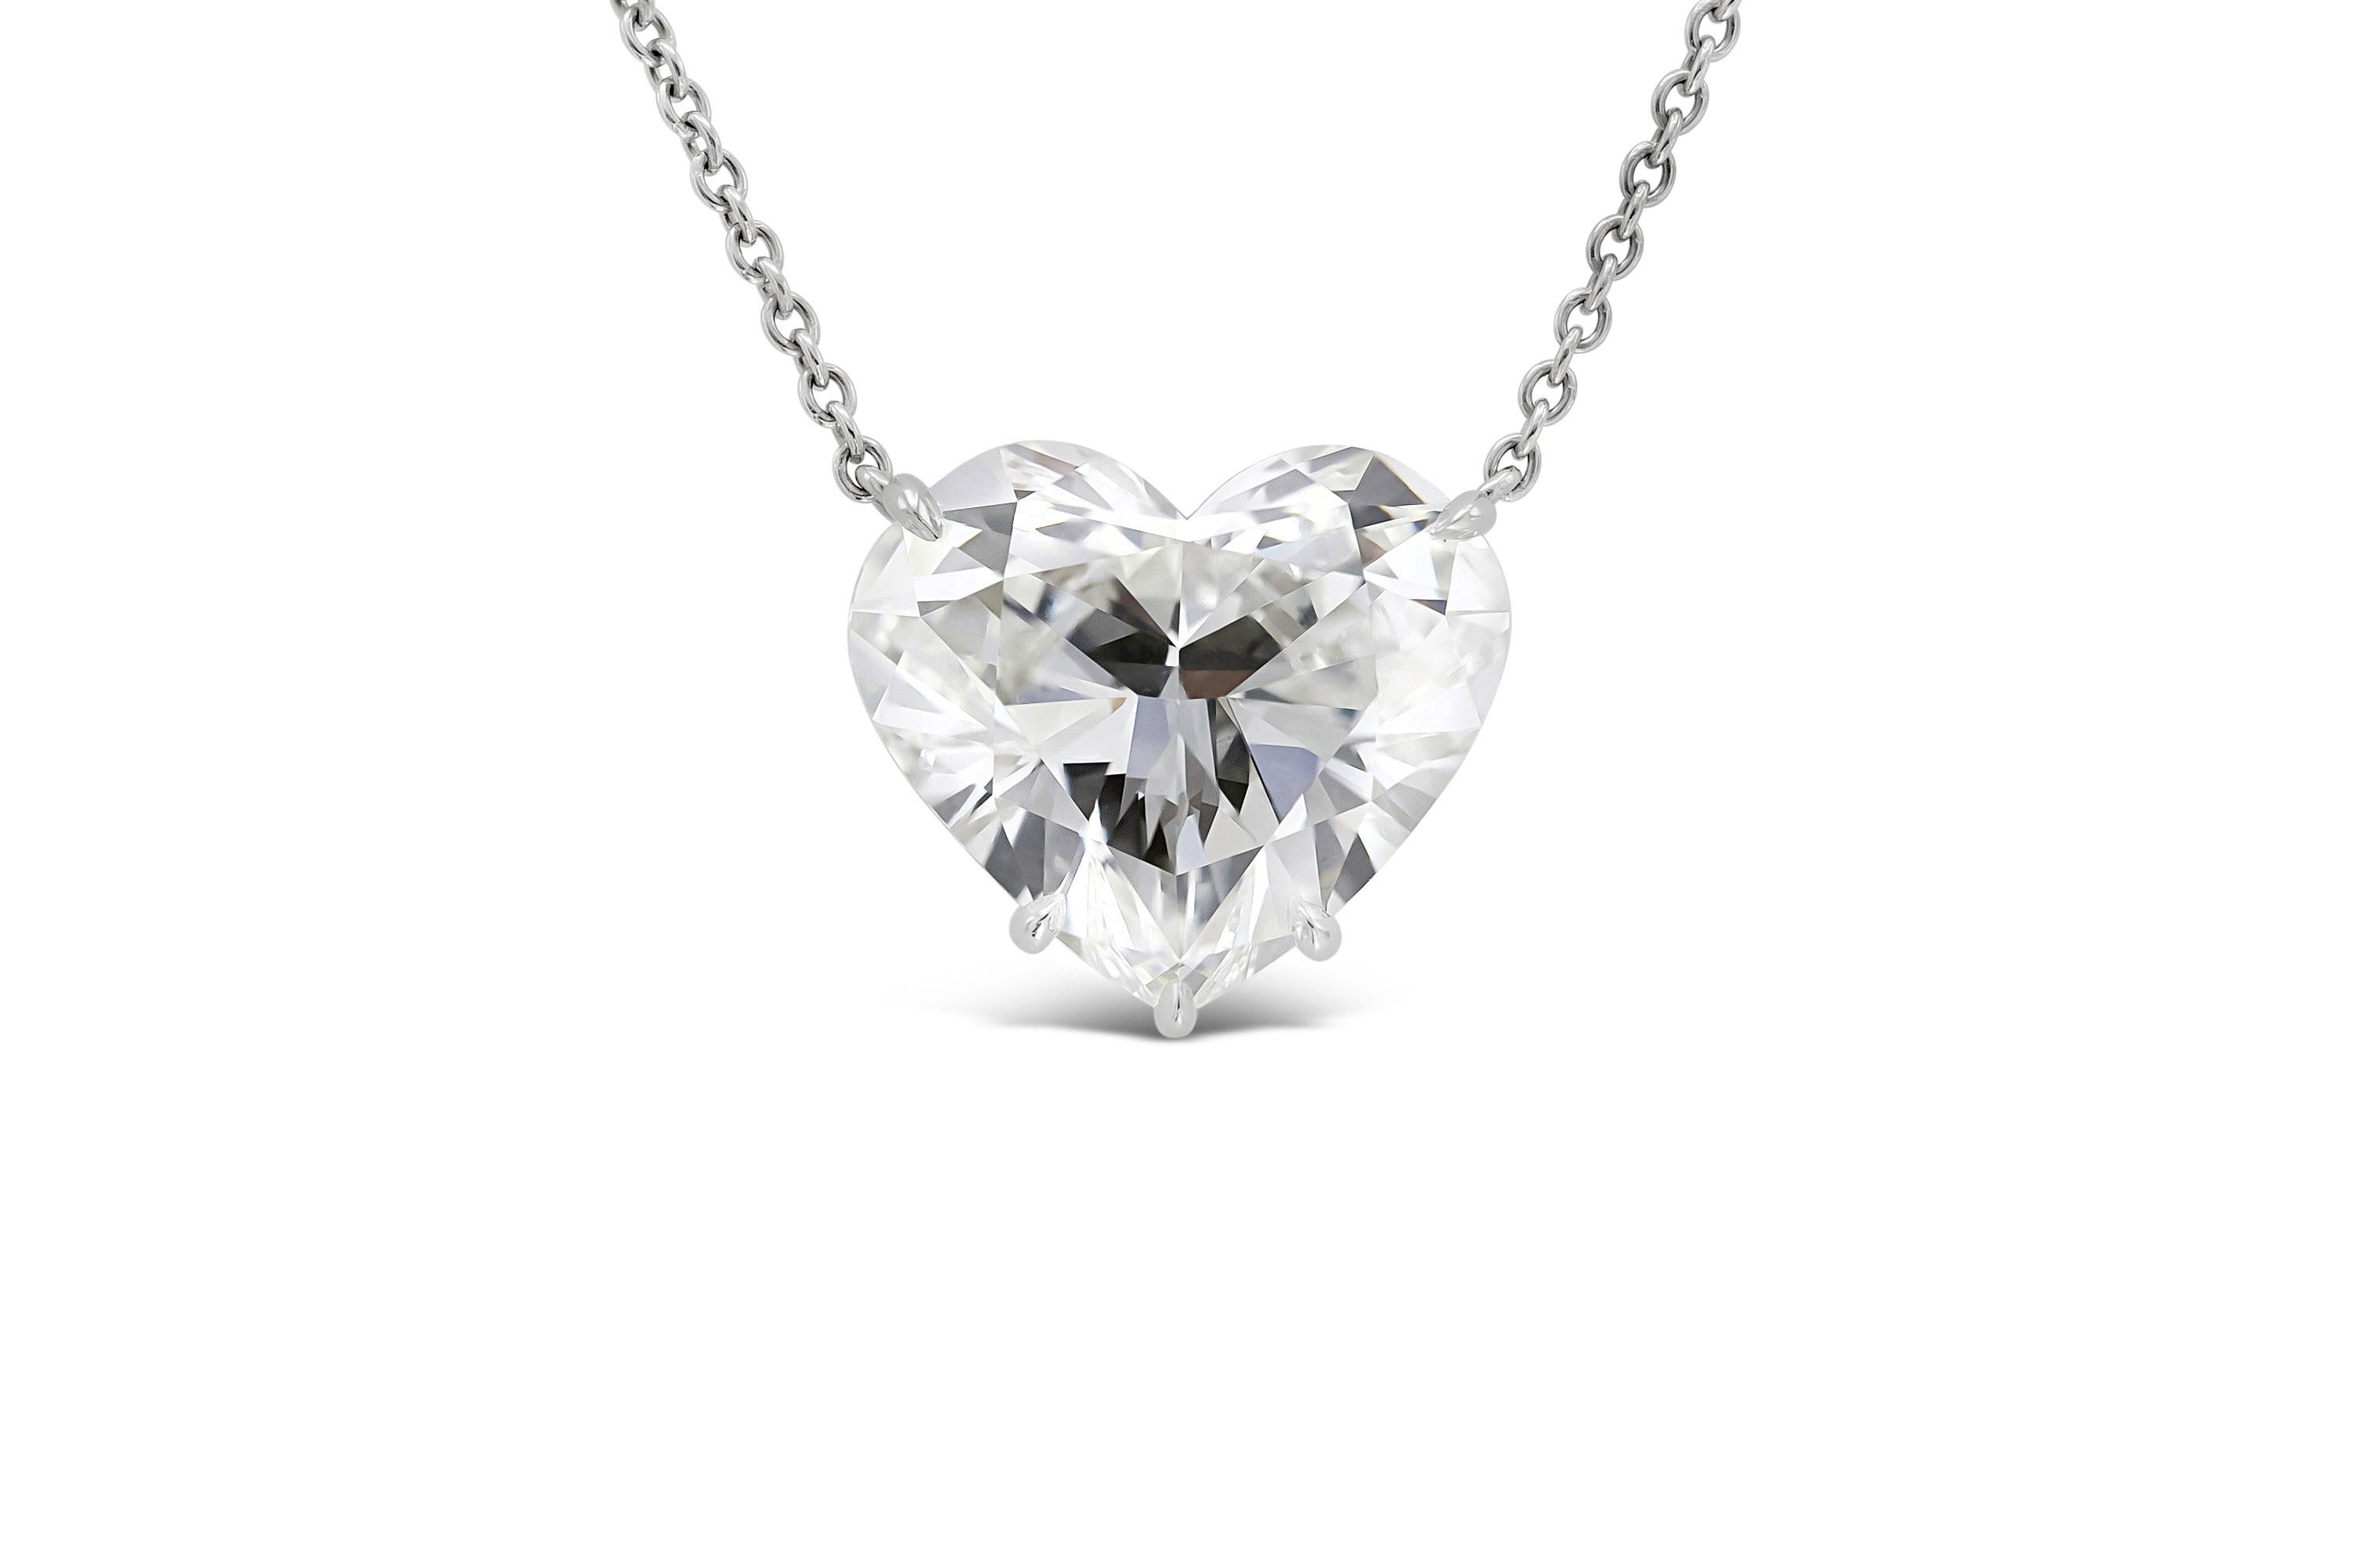 Finely crafted in platinum featuring a heart-shaped diamond weighing 5.63 carats with E color and VS1 clarity.
Signed by Harry Winston.
Accompanied by GIA Report #16836660 and Harry Winston certificate and box.